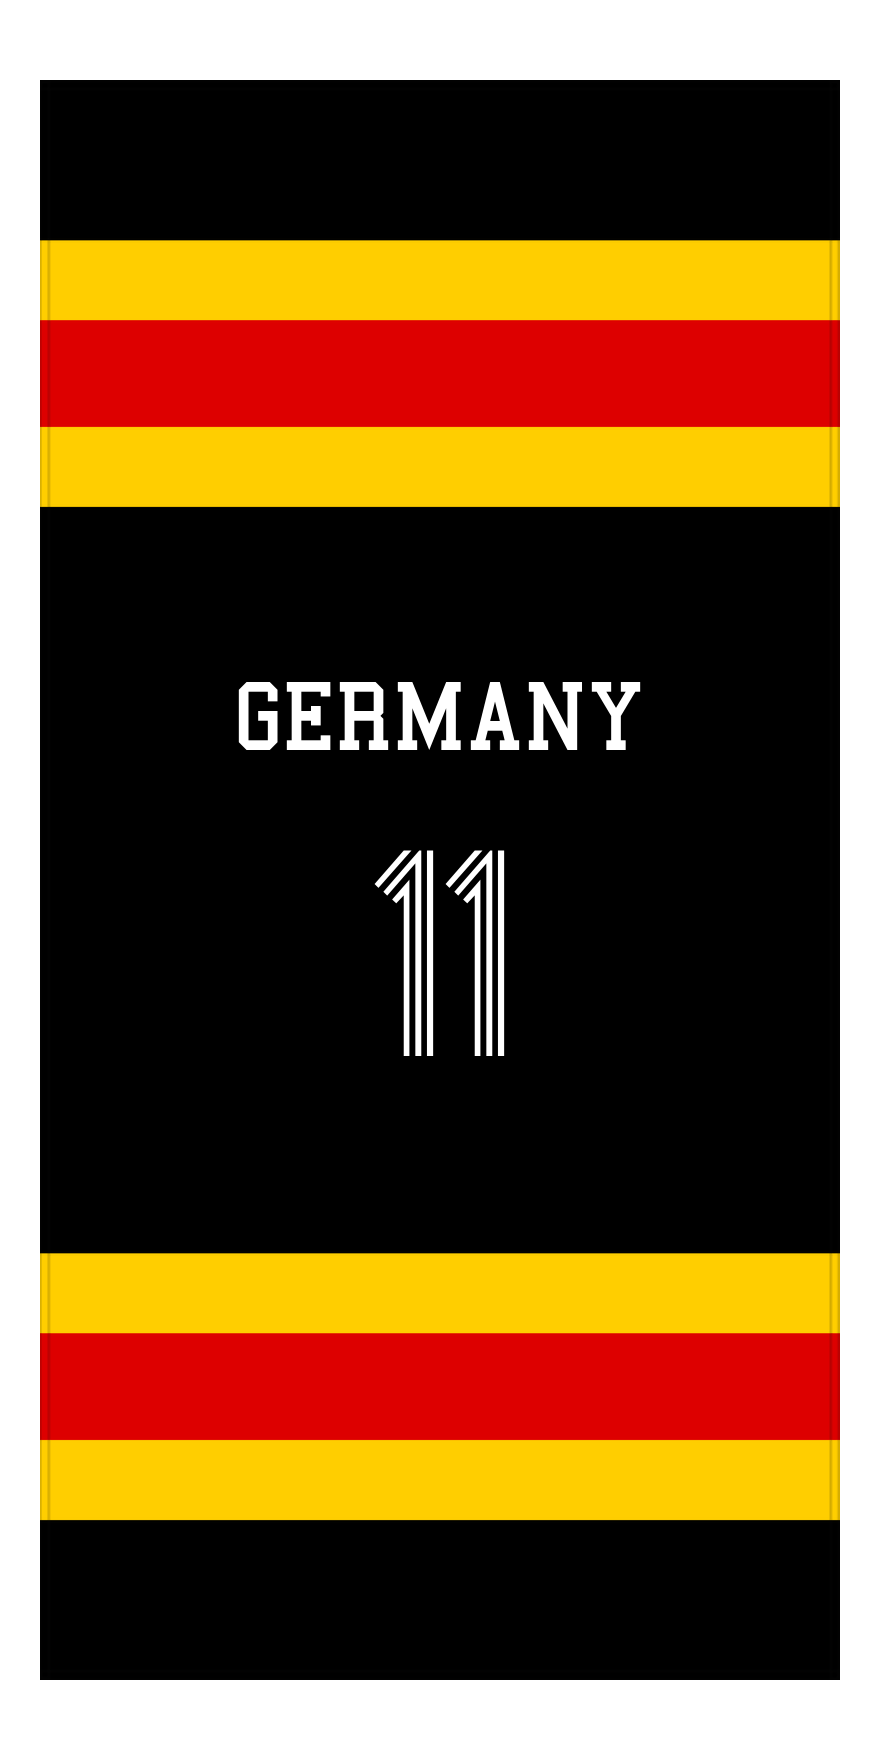 Personalized Jersey Number 1-on-1 Stripes Sports Beach Towel - Germany - Vertical Design - Front View